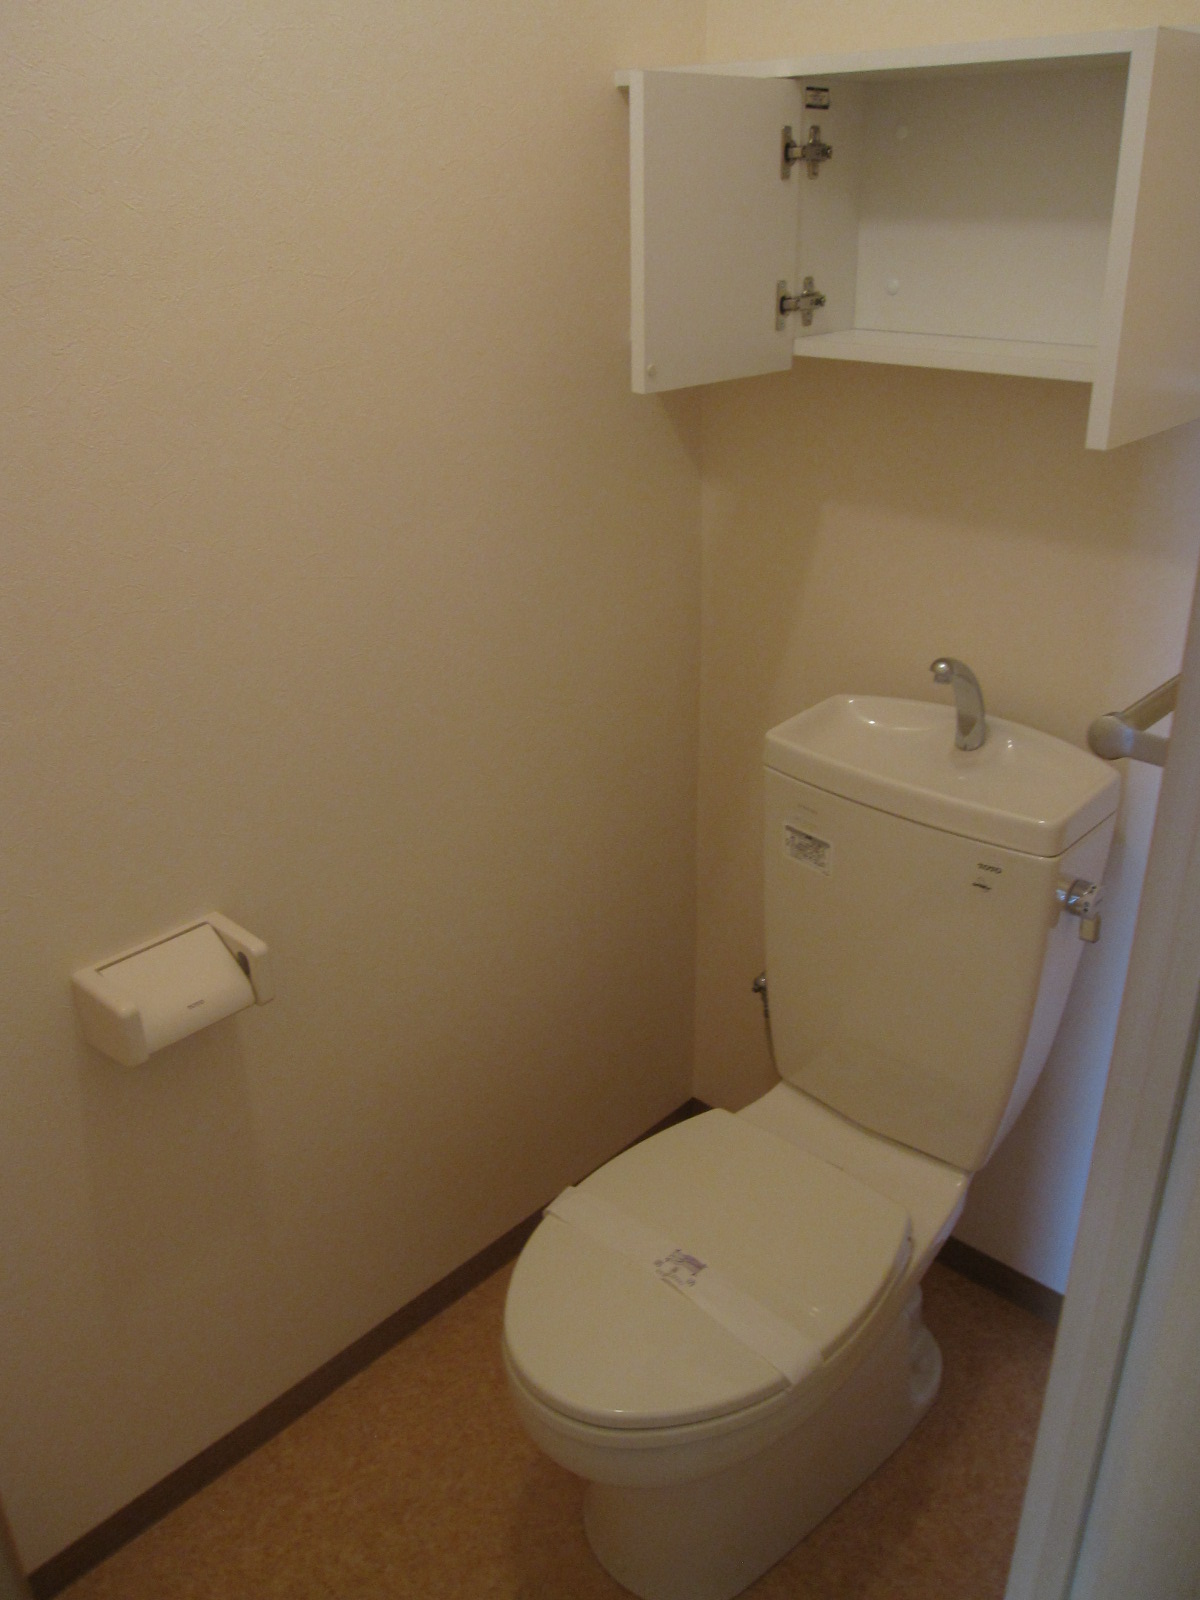 Toilet. With sanitary box small fry is put